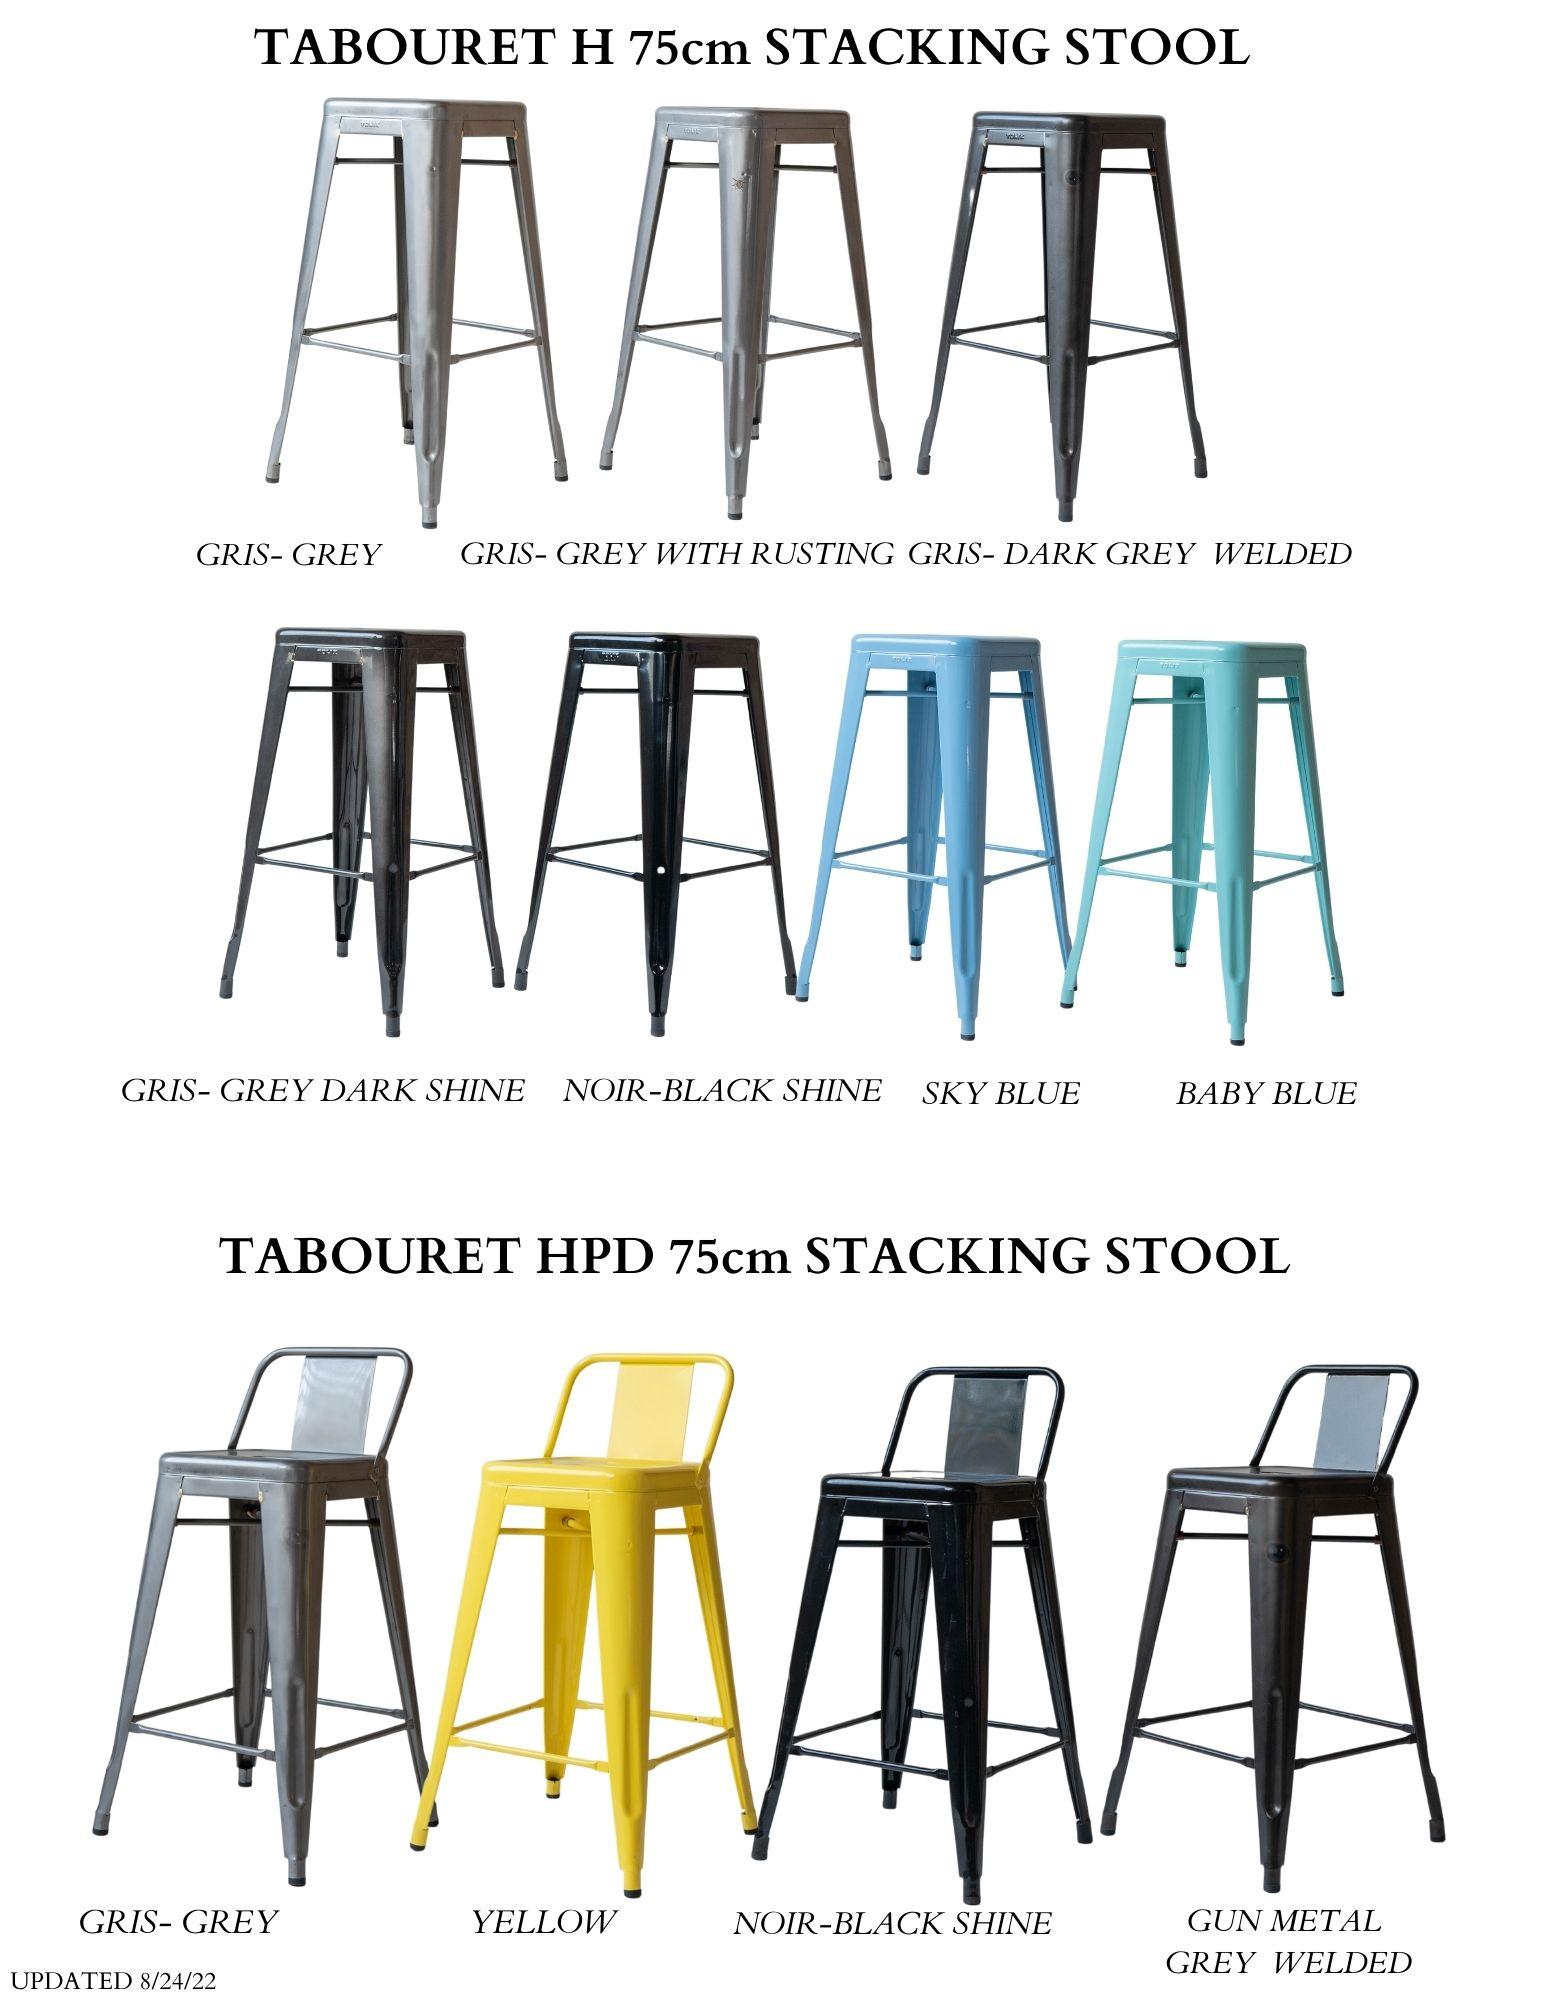 Contemporary Genuine Tolix Steel Stacking Stools Made in France